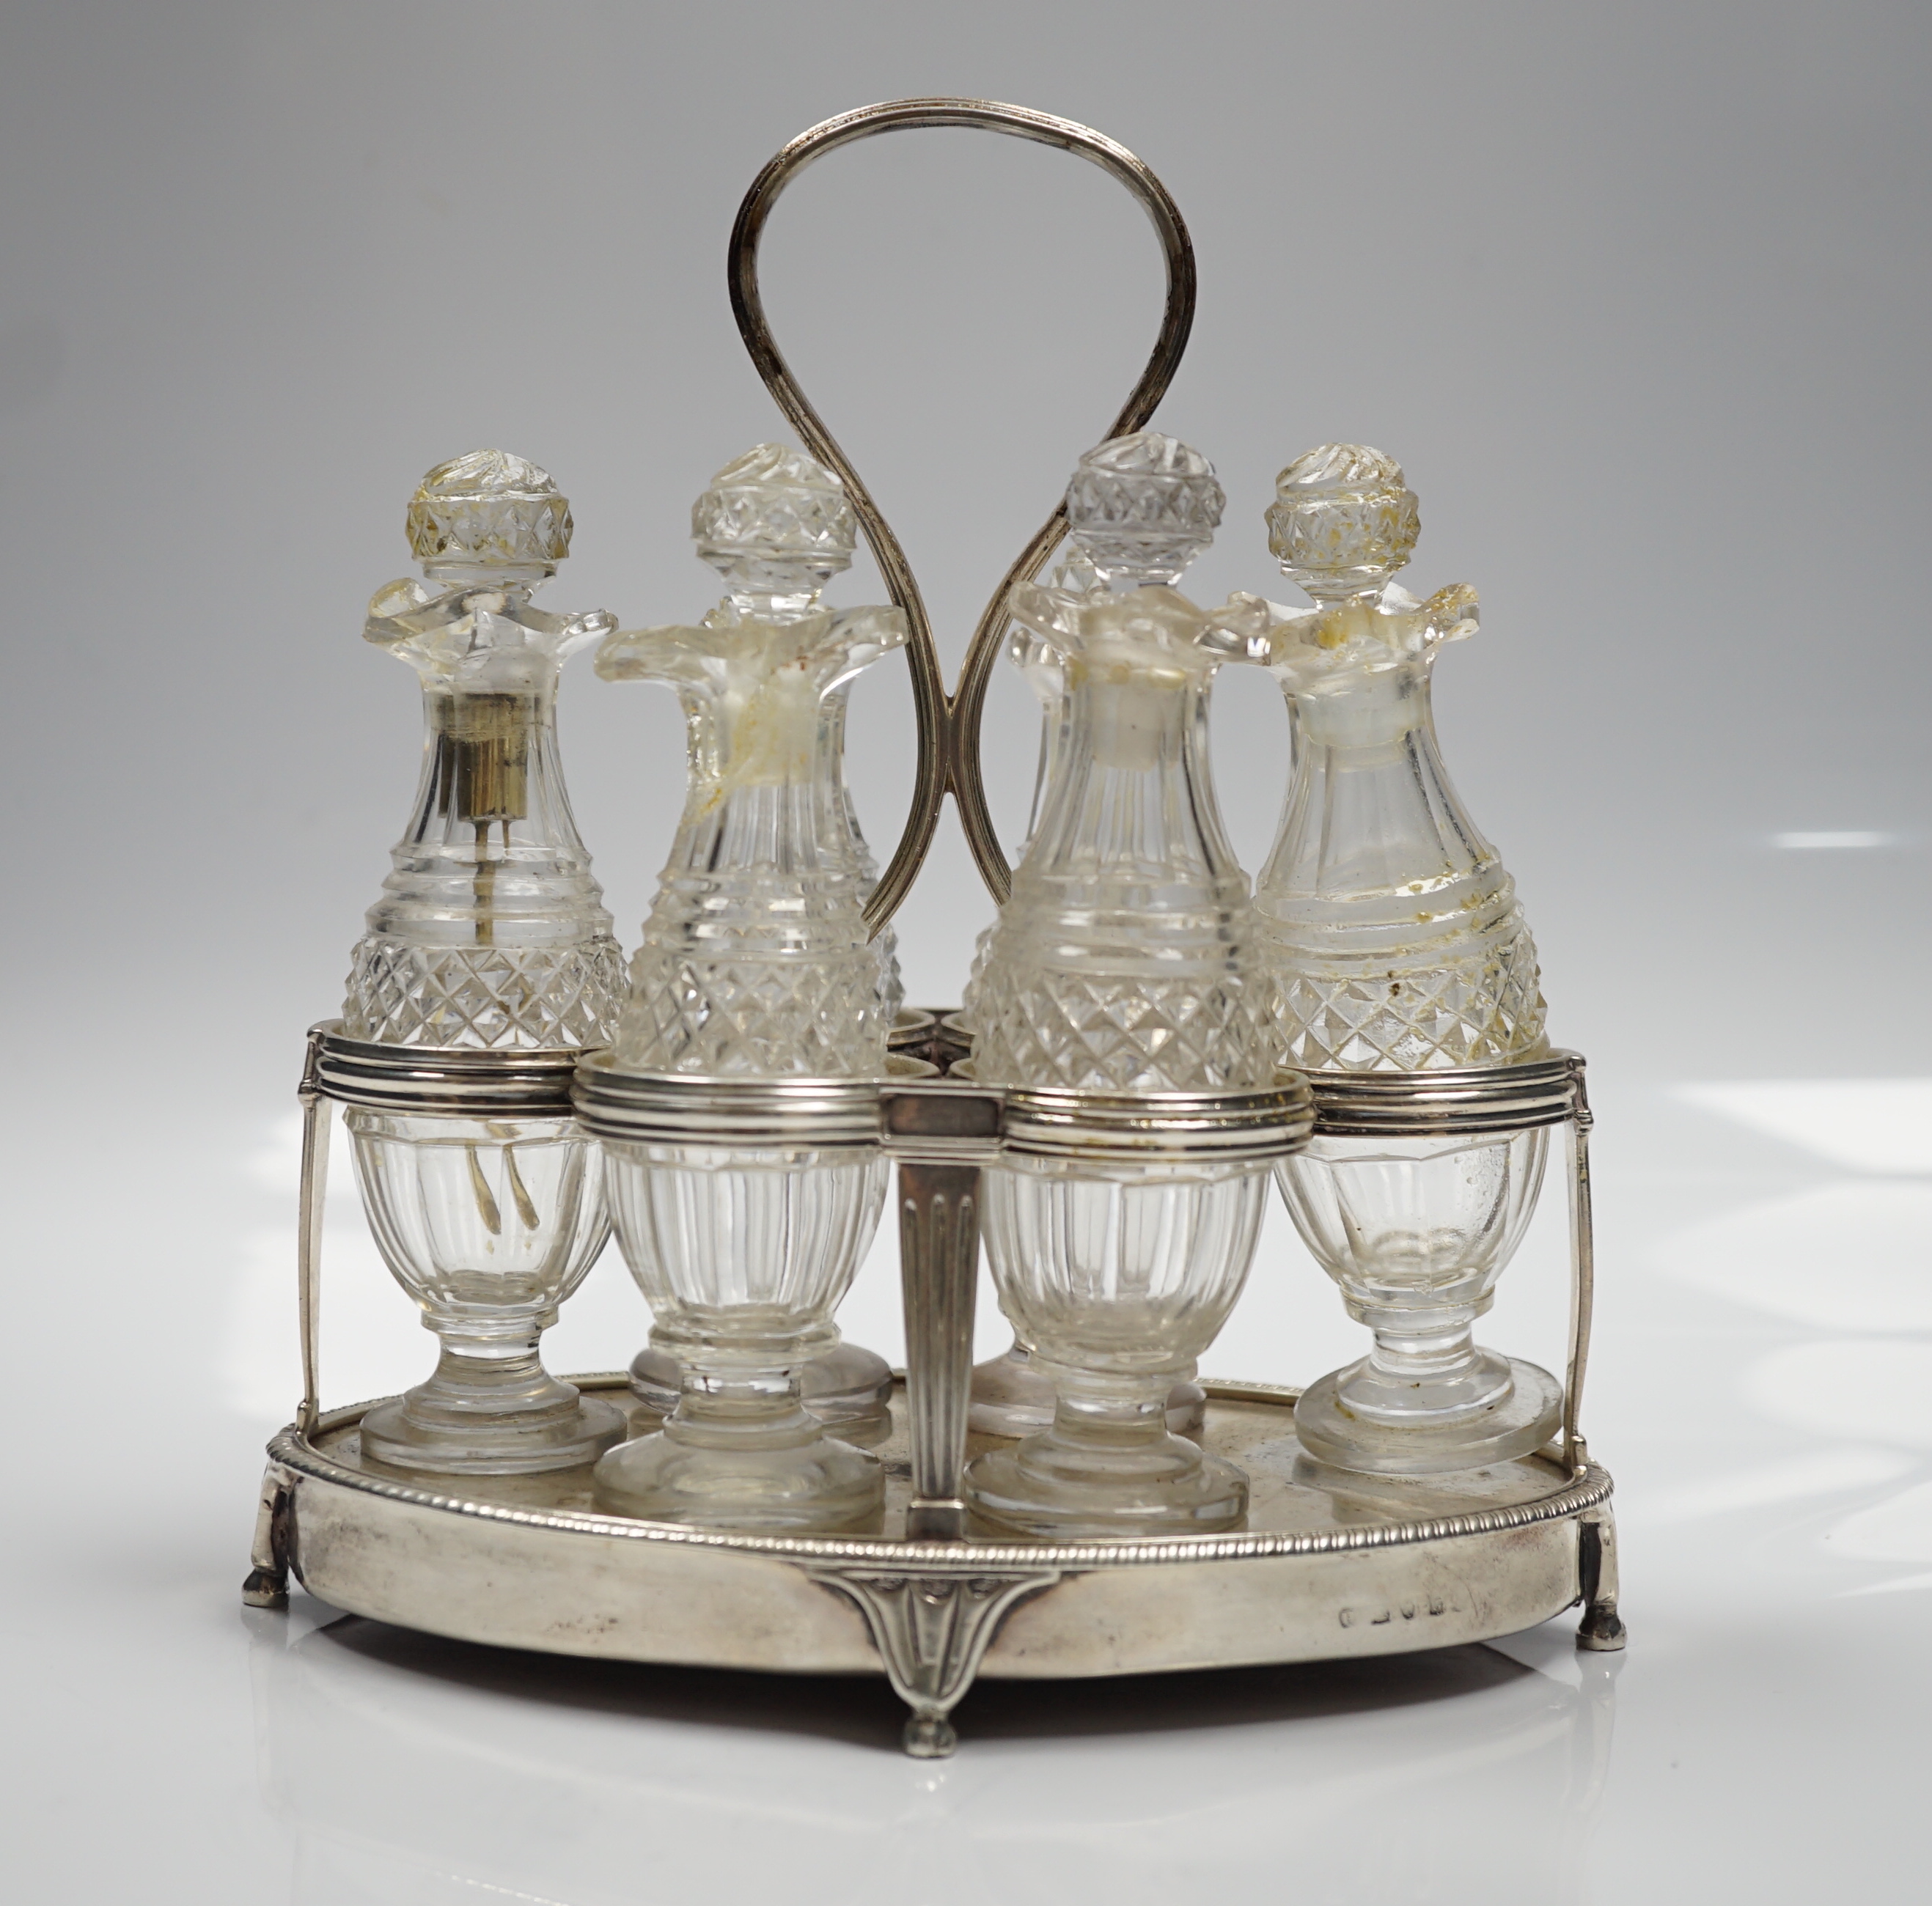 A George III silver mounted oval cruet stand, maker P?, London, 1802, with reeded ring handle and - Image 5 of 8